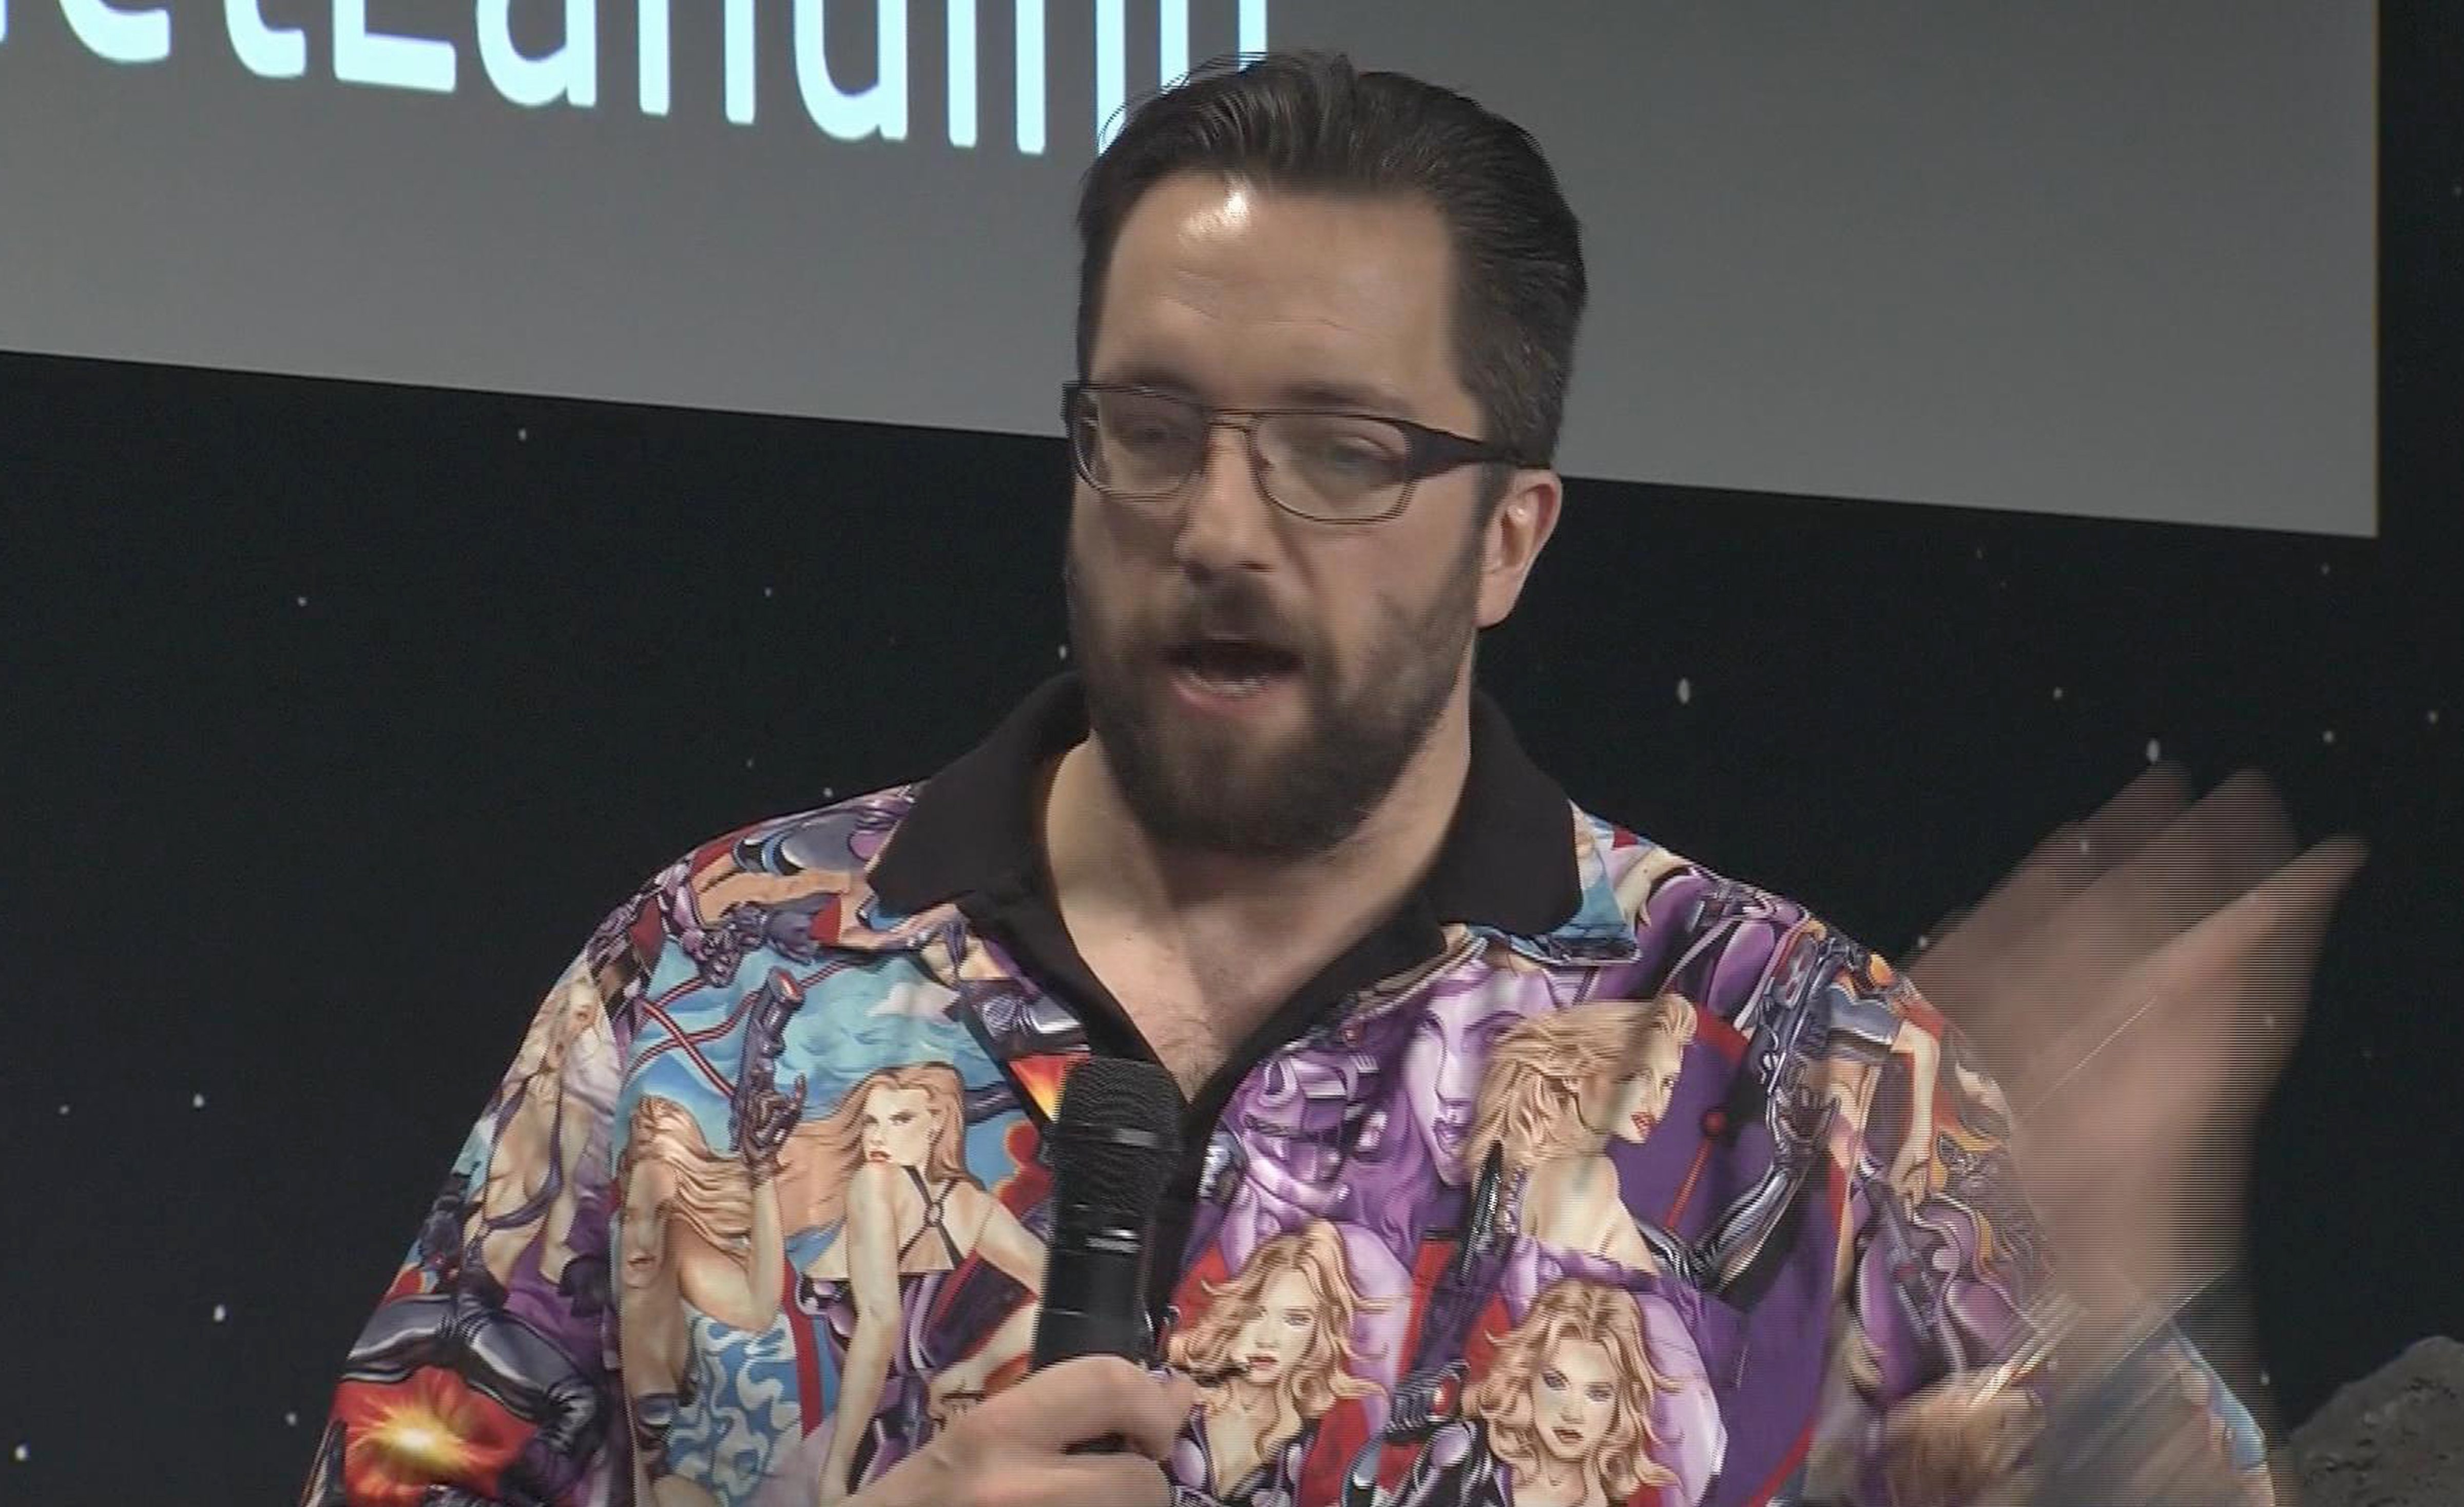 British physicist Matt Taylor sporting a garish shirt featuring a collage of pin-up girls during an interview at the satellite control centre of the European Space Agency in Darmstadt, Germany on Nov. 13, 2014.